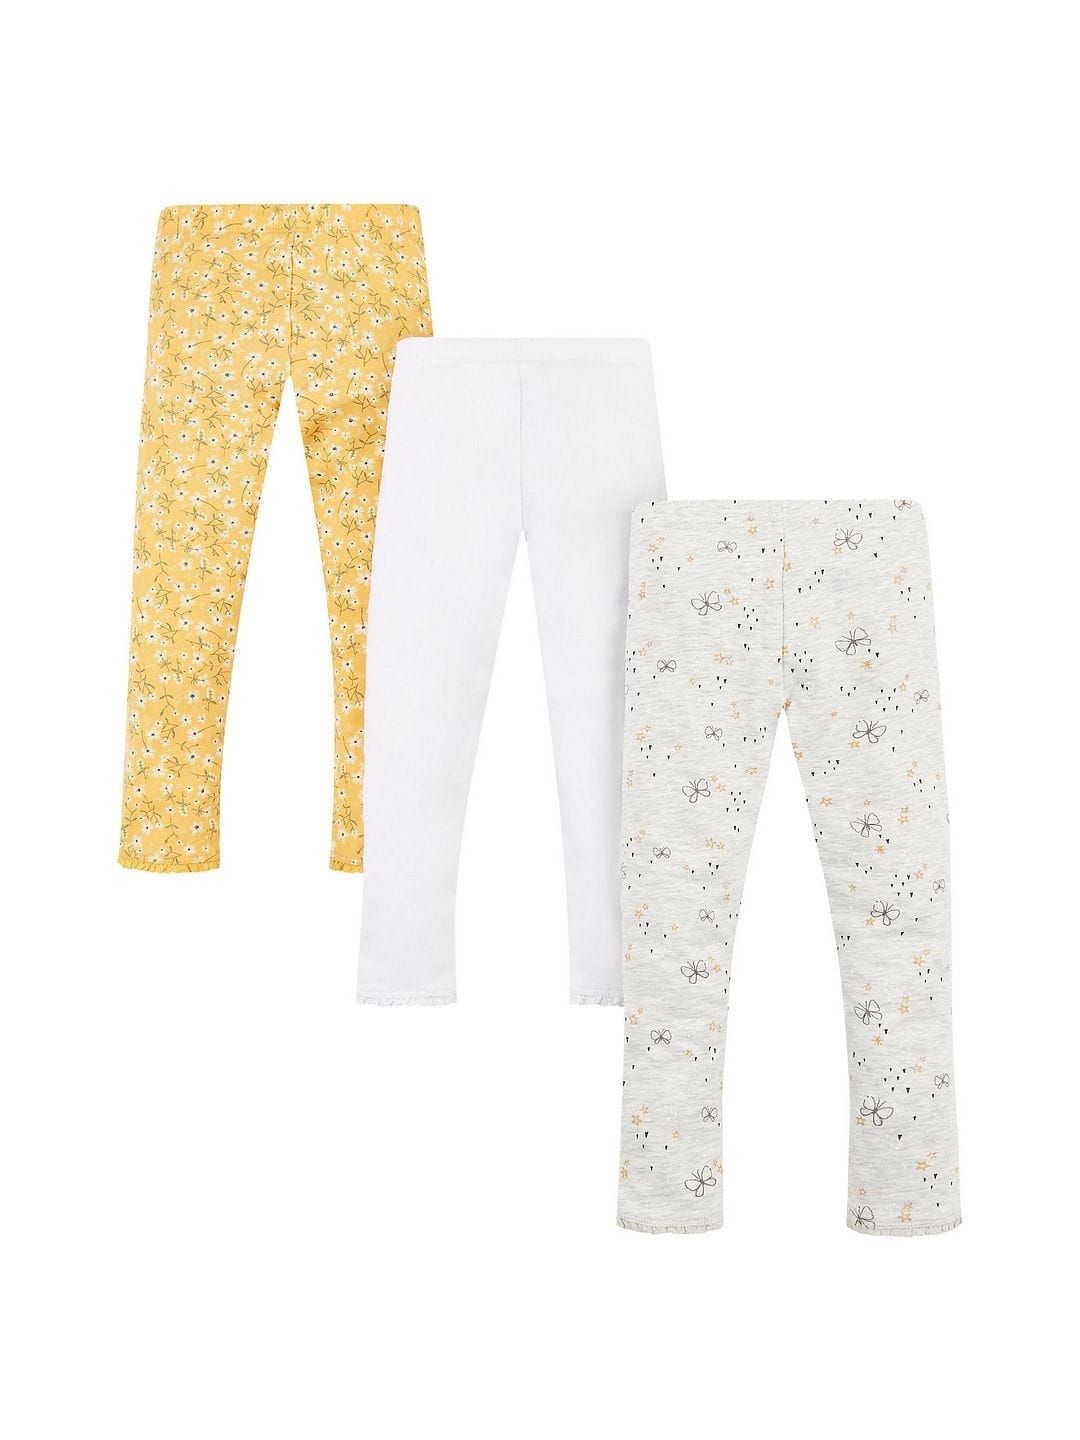 Mothercare | Multicoloured Printed Trousers - Pack of 3 0